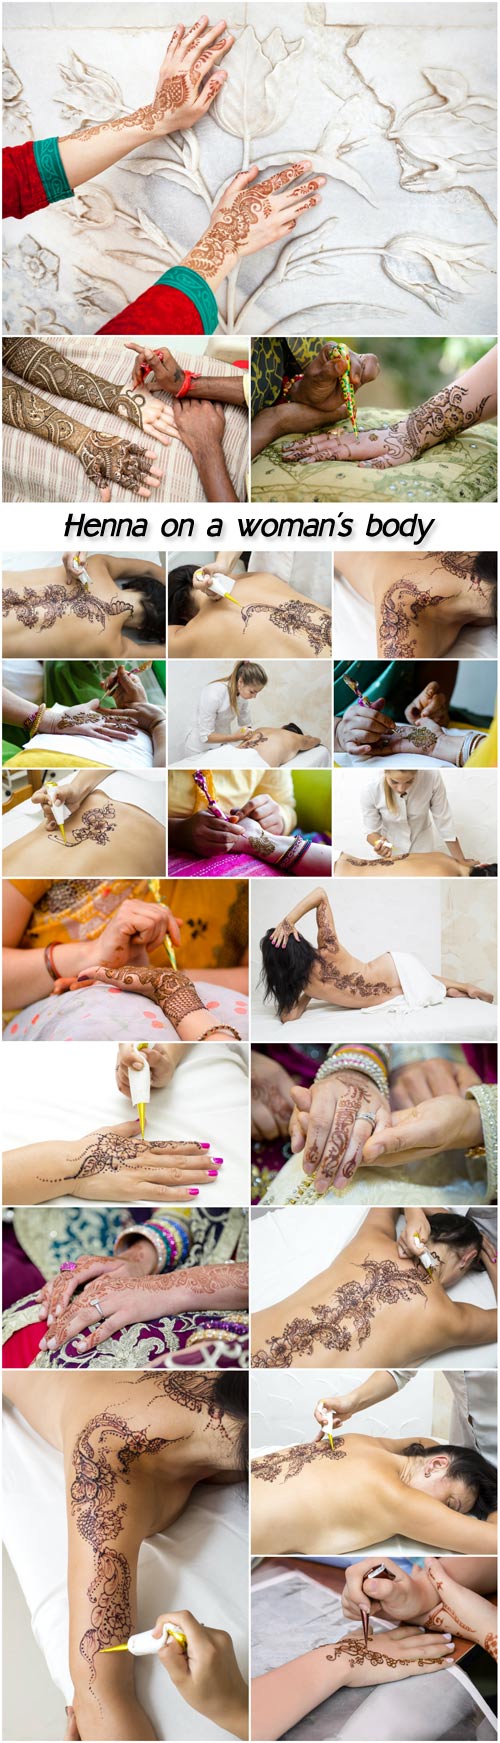 Henna on a woman's body